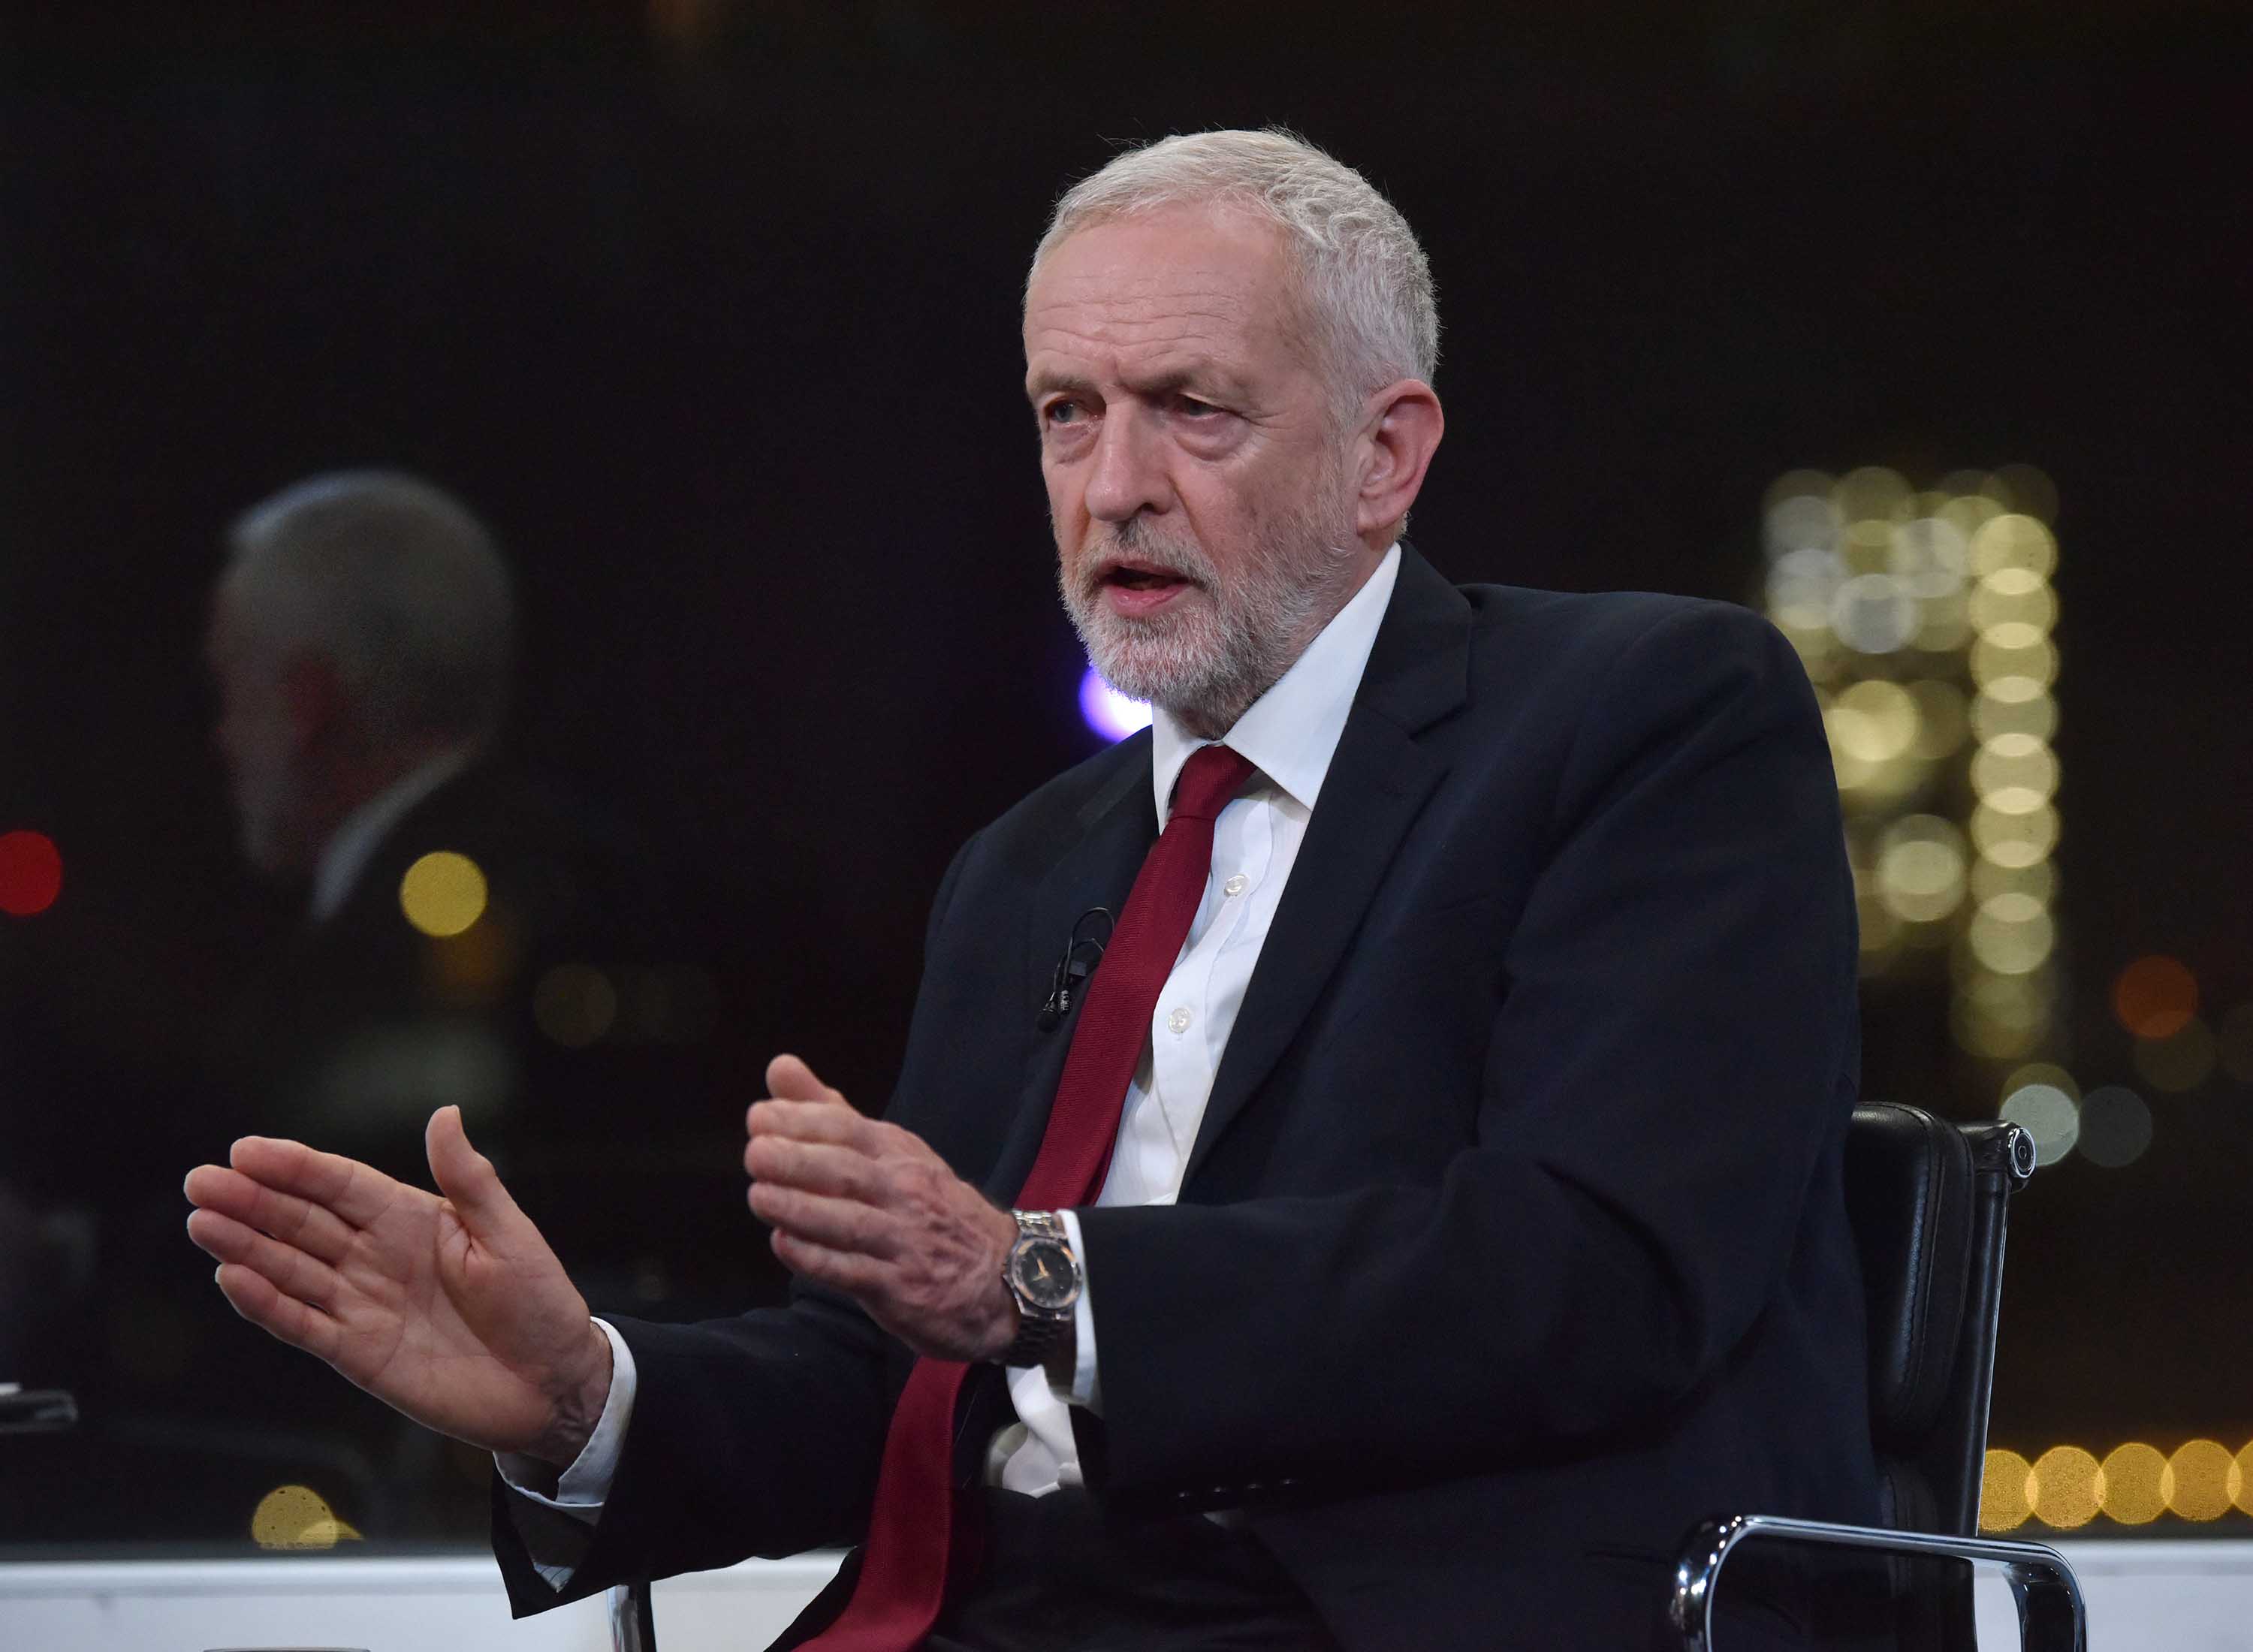 Labour leader Jeremy Corbyn during Tuesday's interview